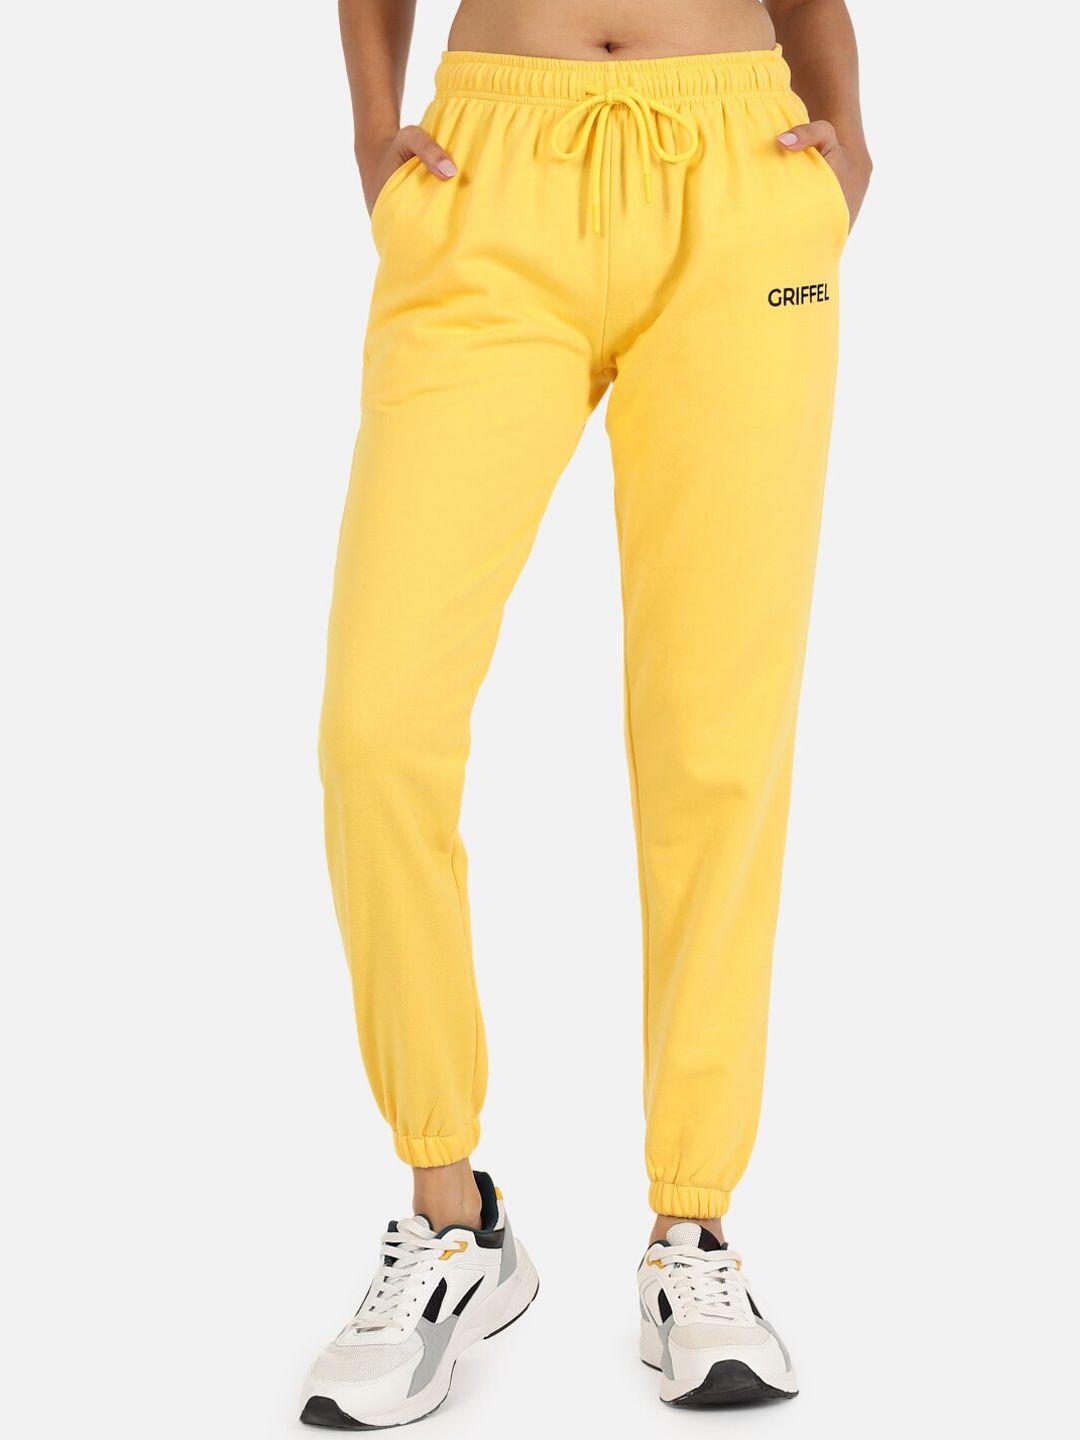 griffel women yellow solid cotton joggers